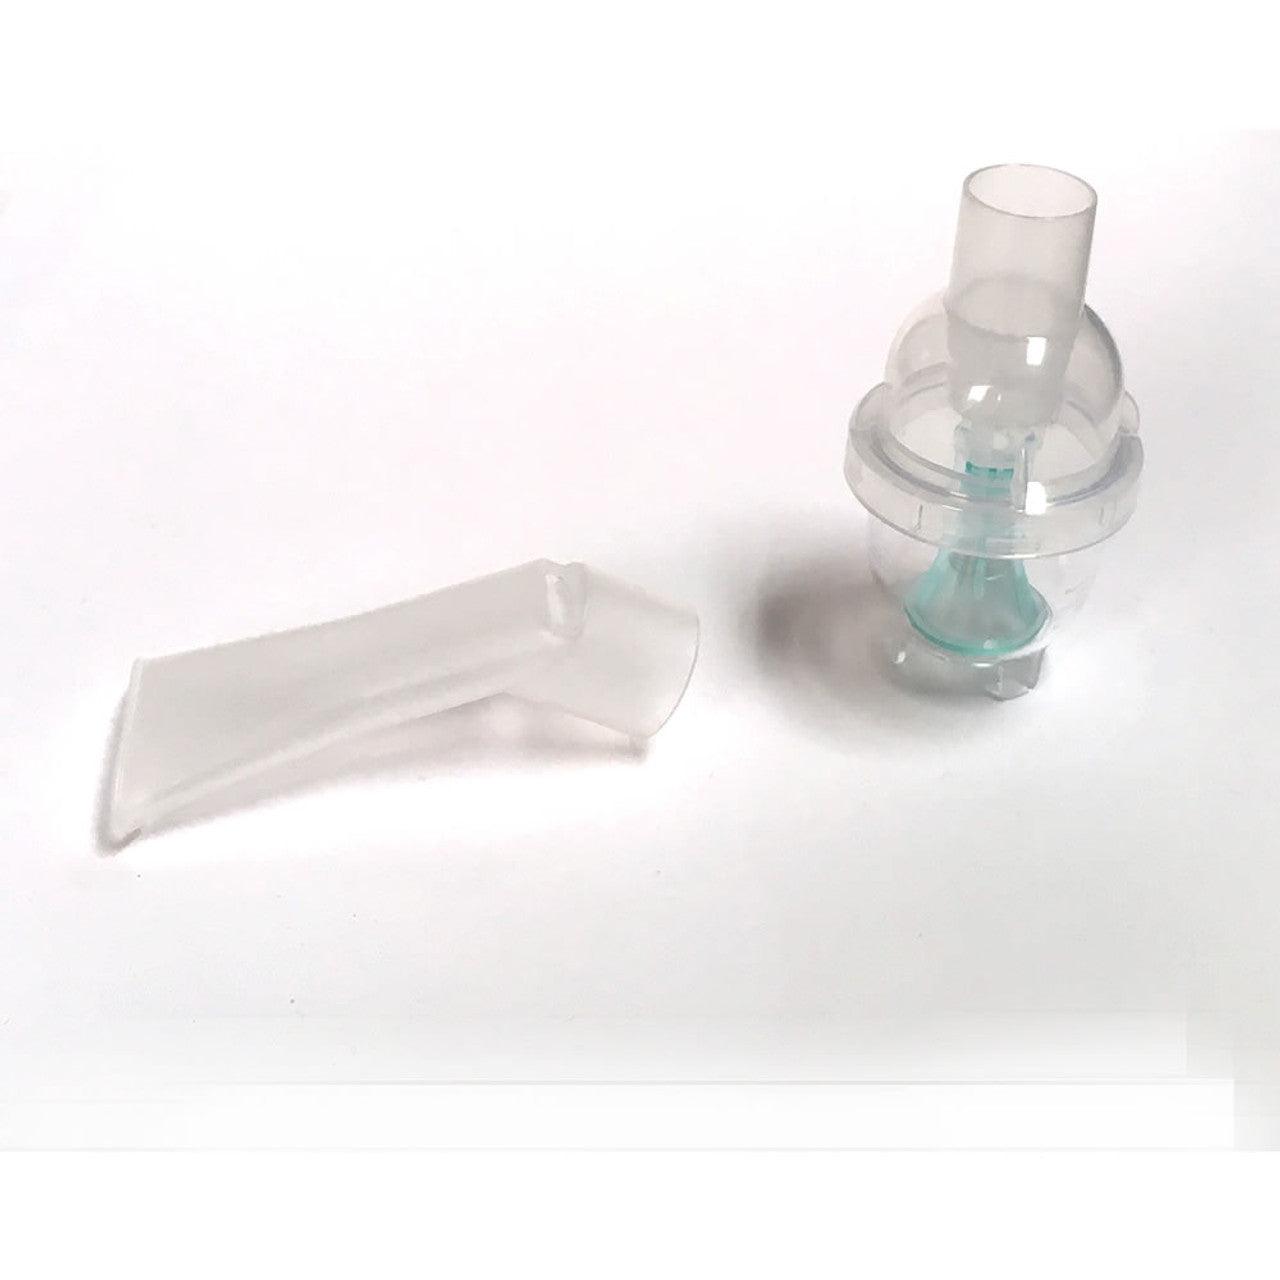 Nebulizer cup, insert, cap and mouthpiece